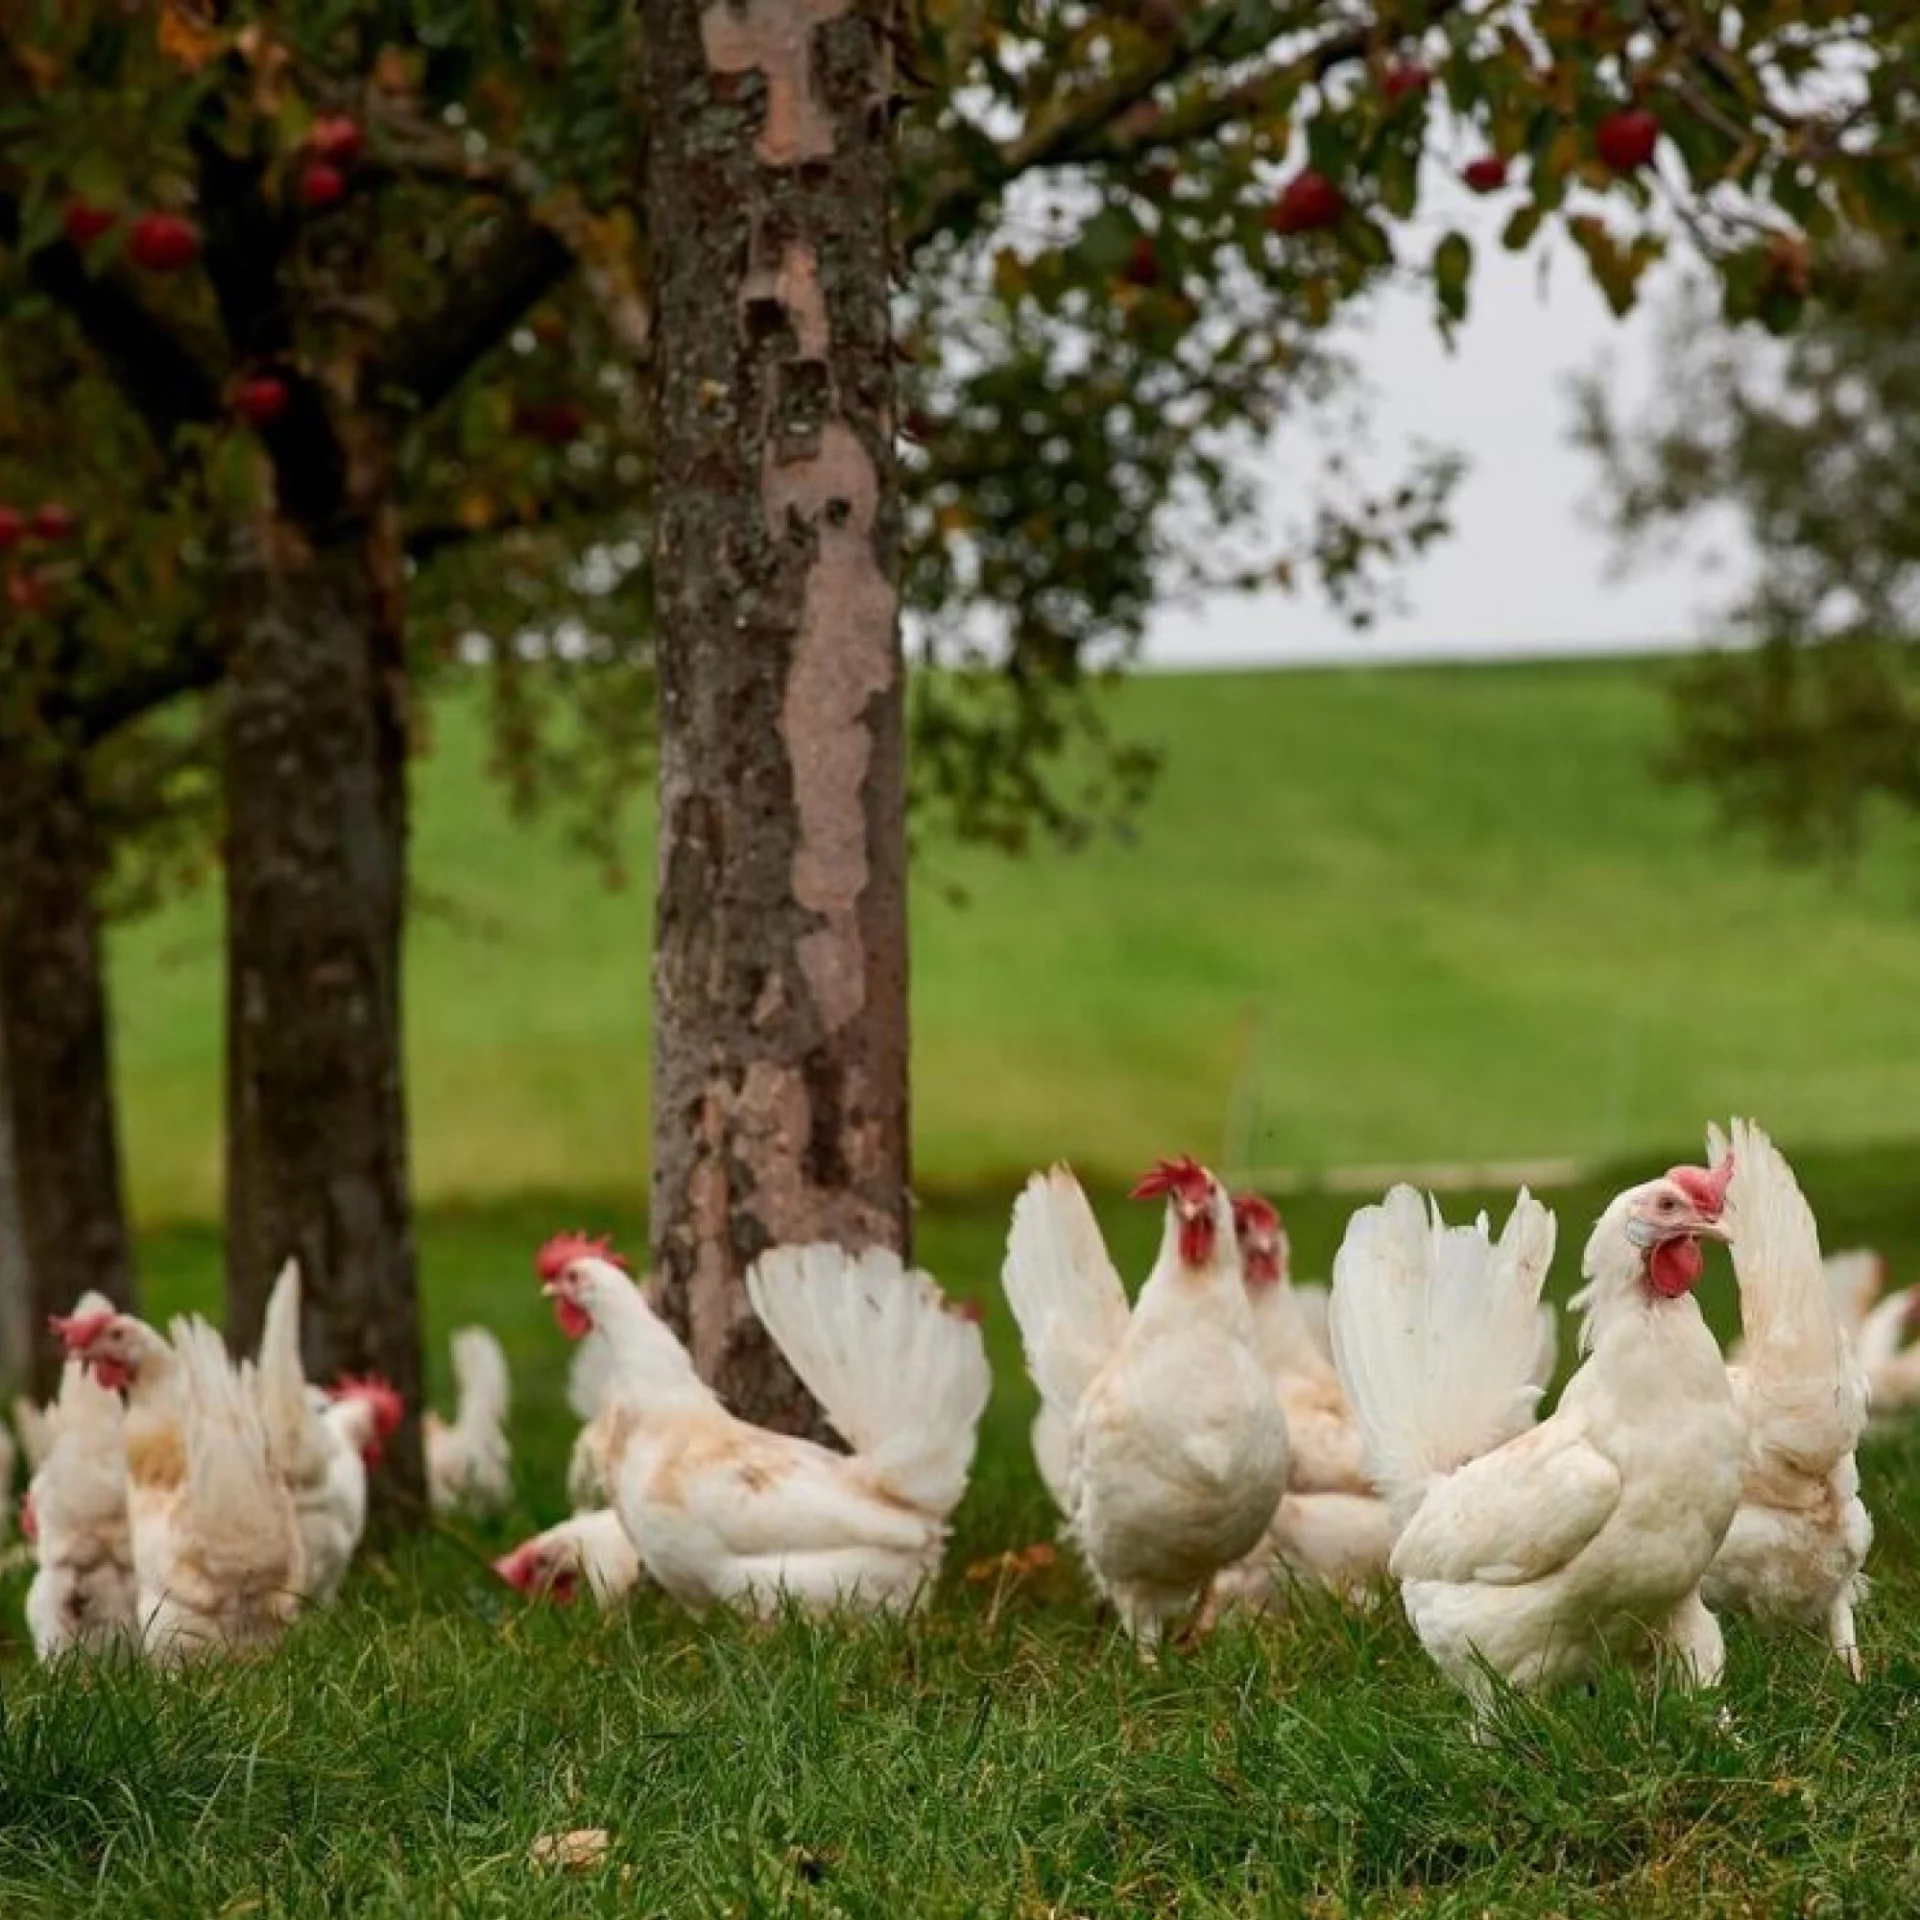 Chickens on a pasture